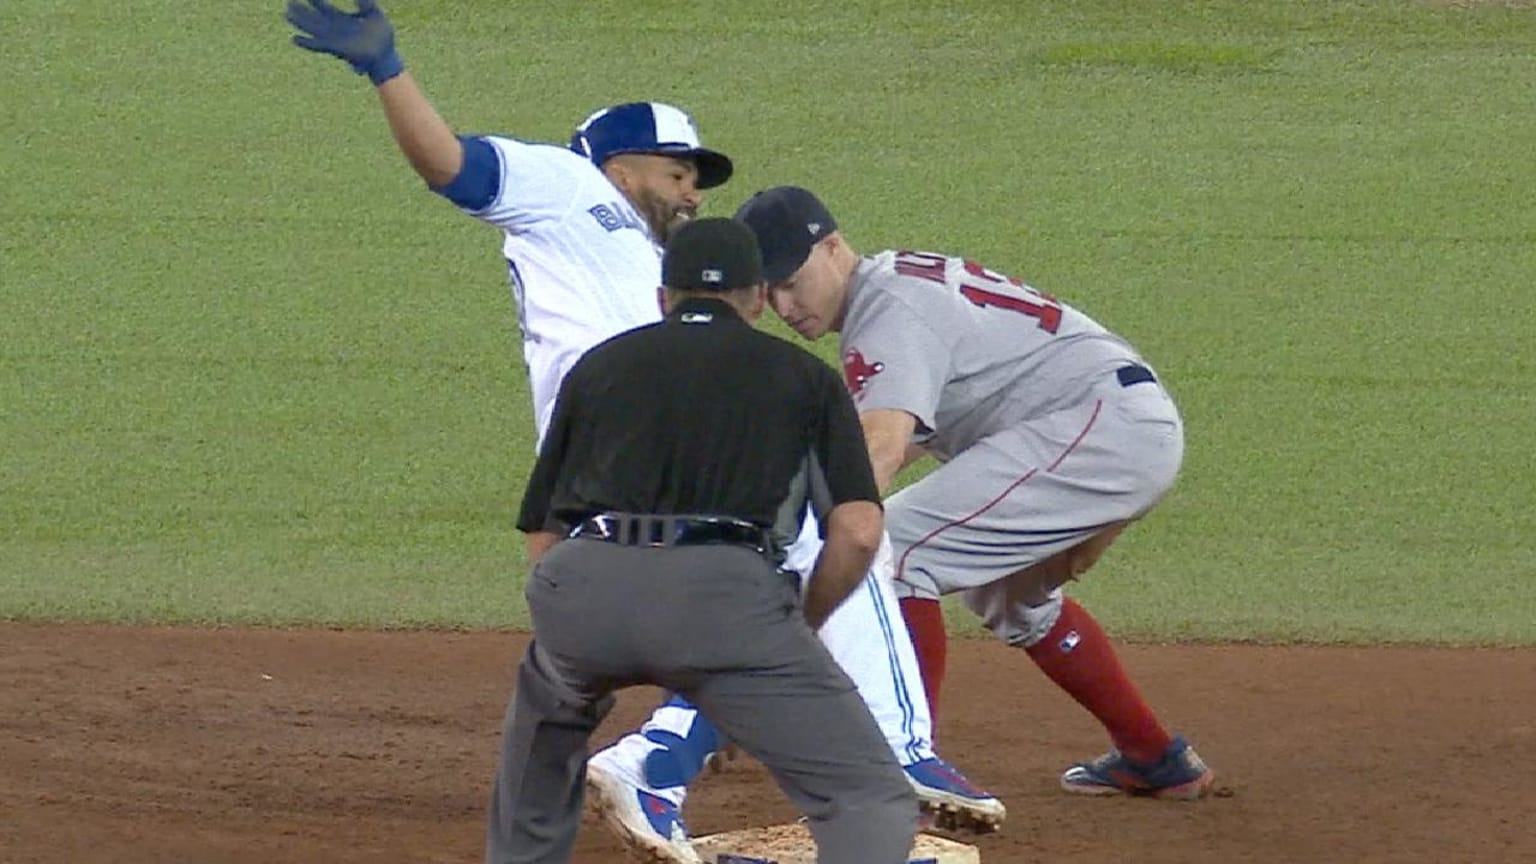 MLB umpires may get on-field microphones to explain replay review outcomes  - Bless You Boys